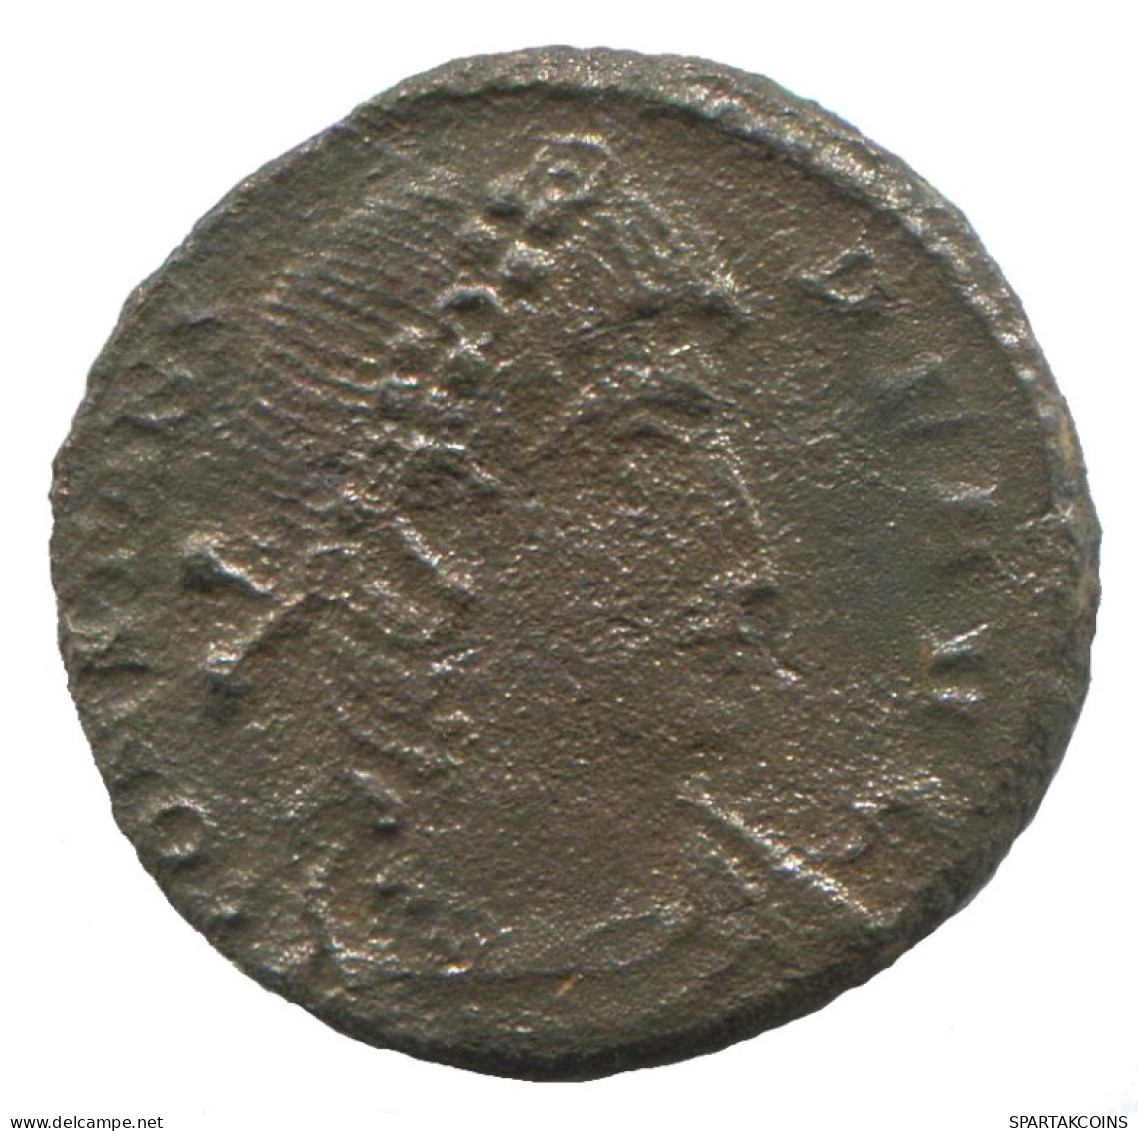 CONSTANTIUS II THESSALONICA SMTSΕ VICTORIAEDDAVGGGNN 2.2g/17m #ANN1644.30.D.A - The Christian Empire (307 AD To 363 AD)